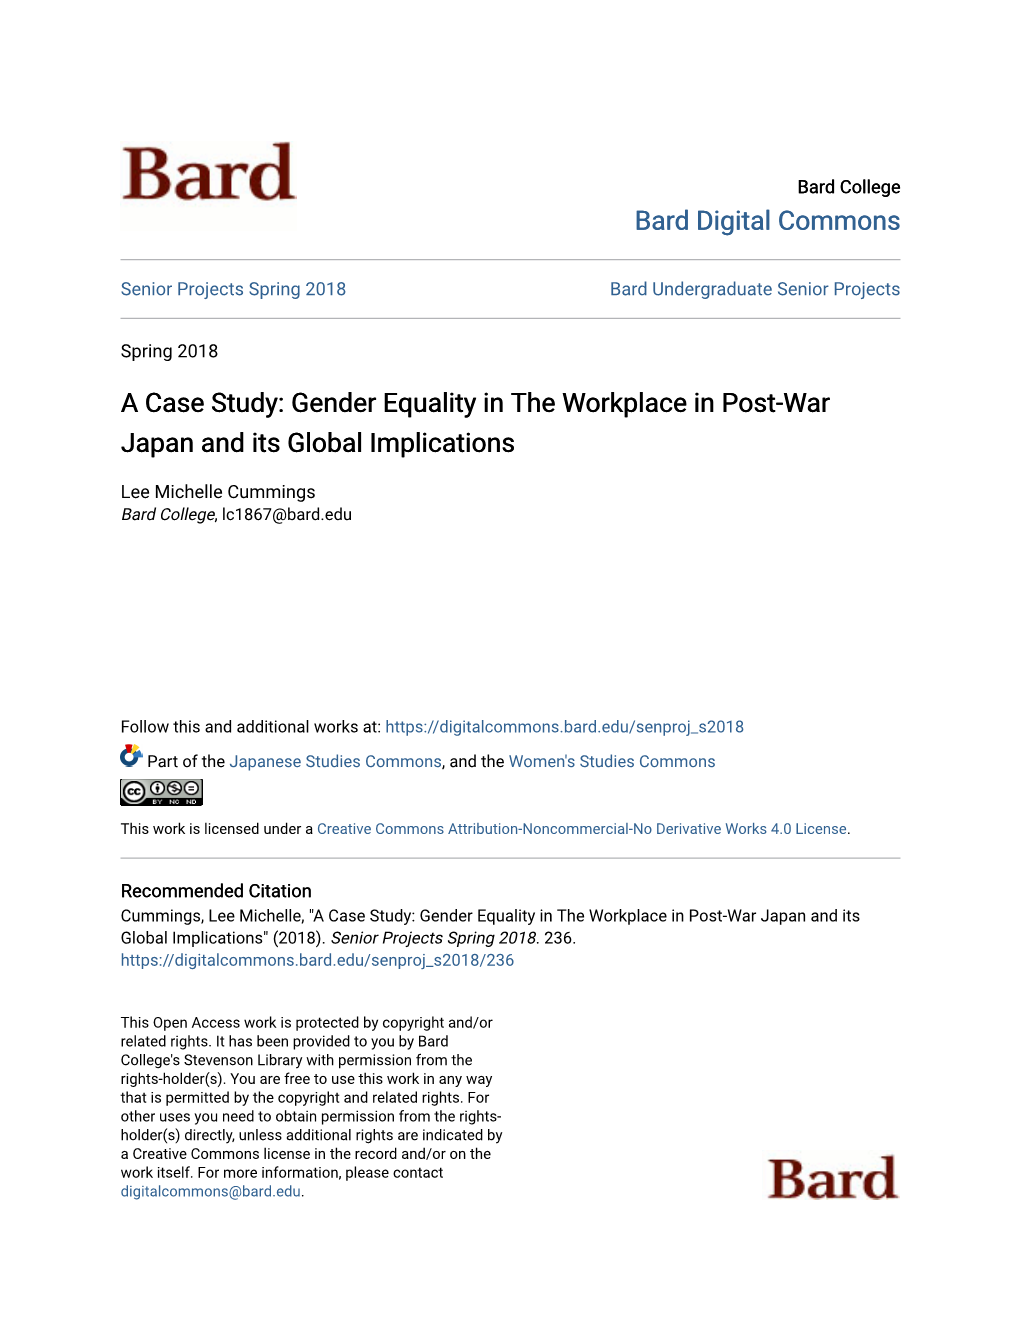 Gender Equality in the Workplace in Post-War Japan and Its Global Implications